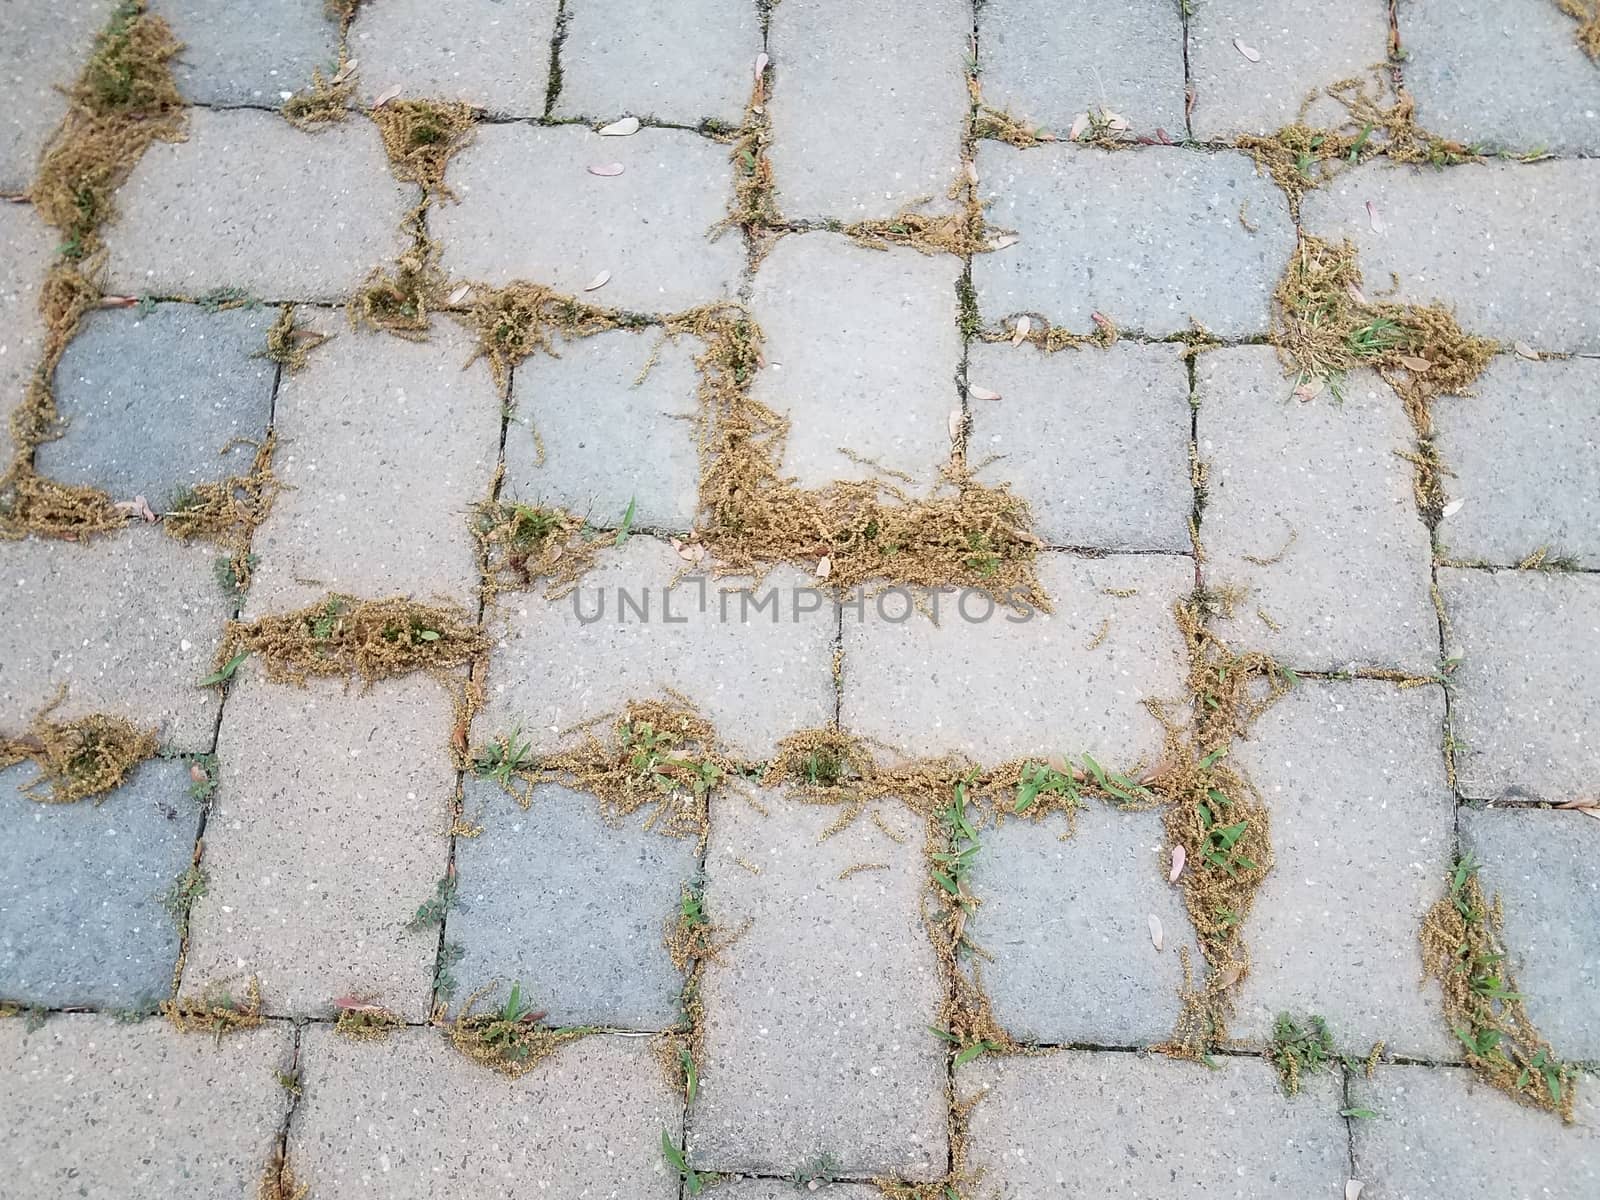 grey stone tiles and pollen on ground and weeds by stockphotofan1